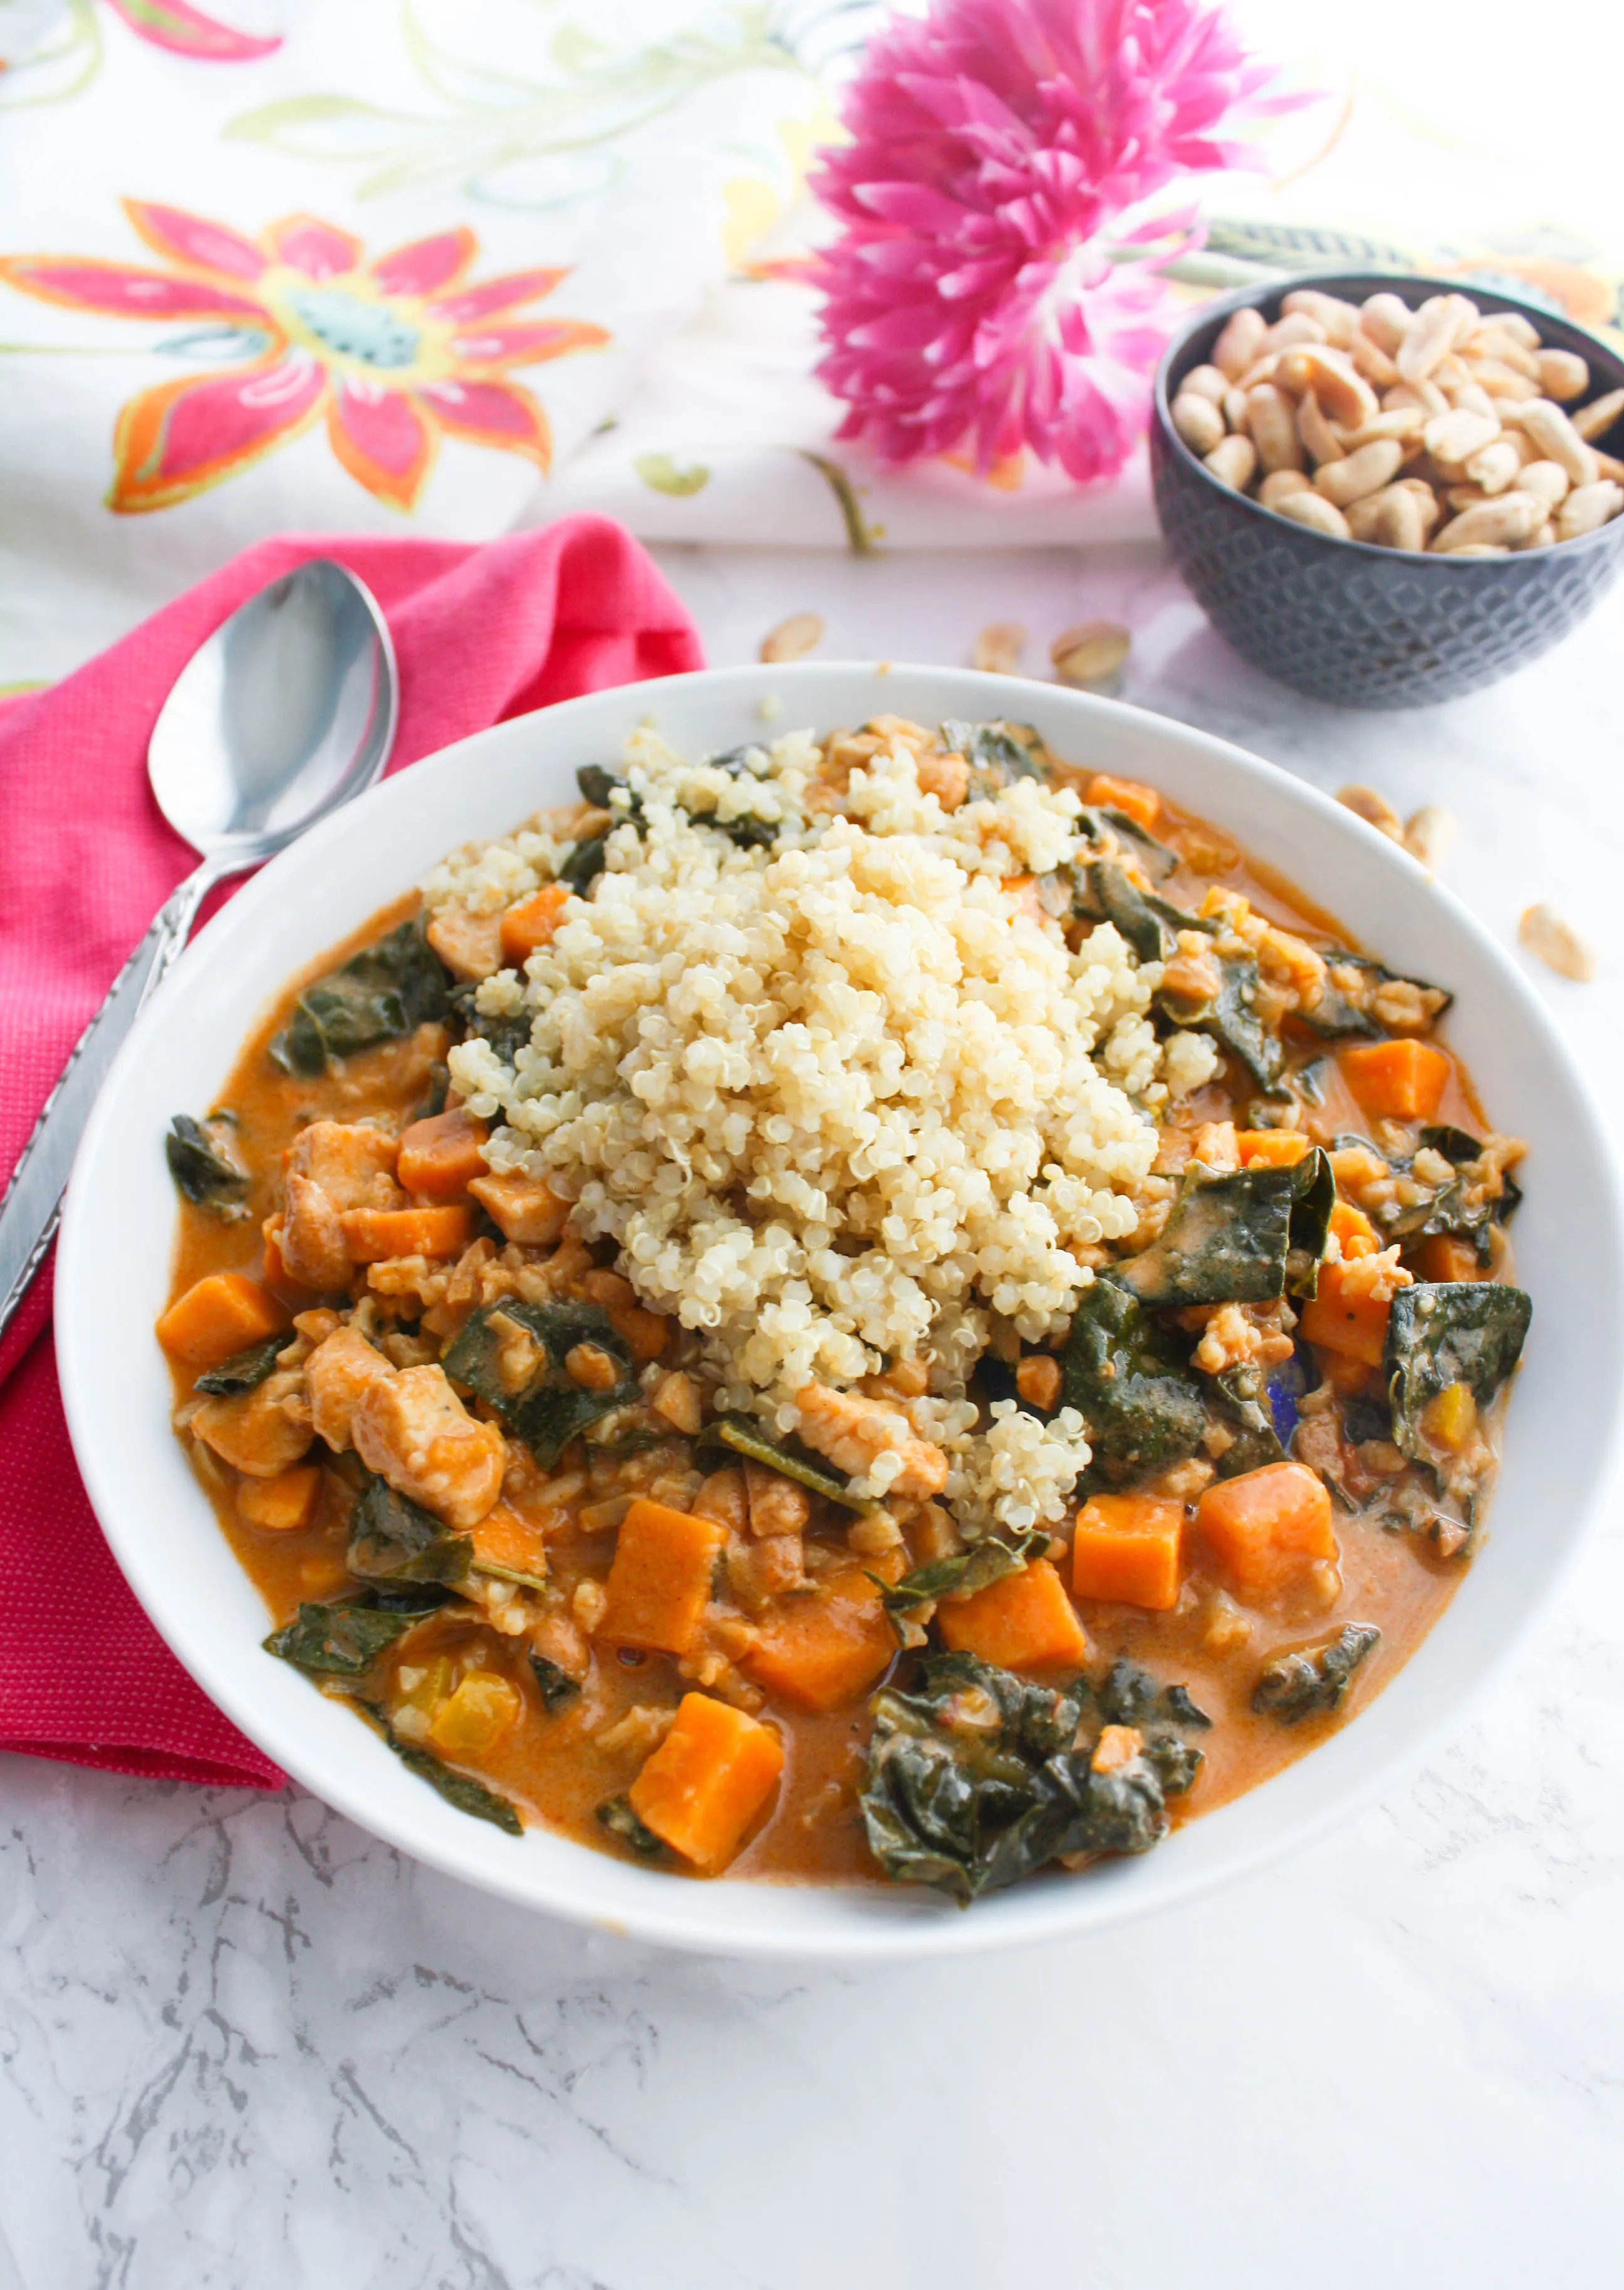 West African Peanut Stew is a delightful dish. You'll love the seasonings and colors of West African Peanut Stew.